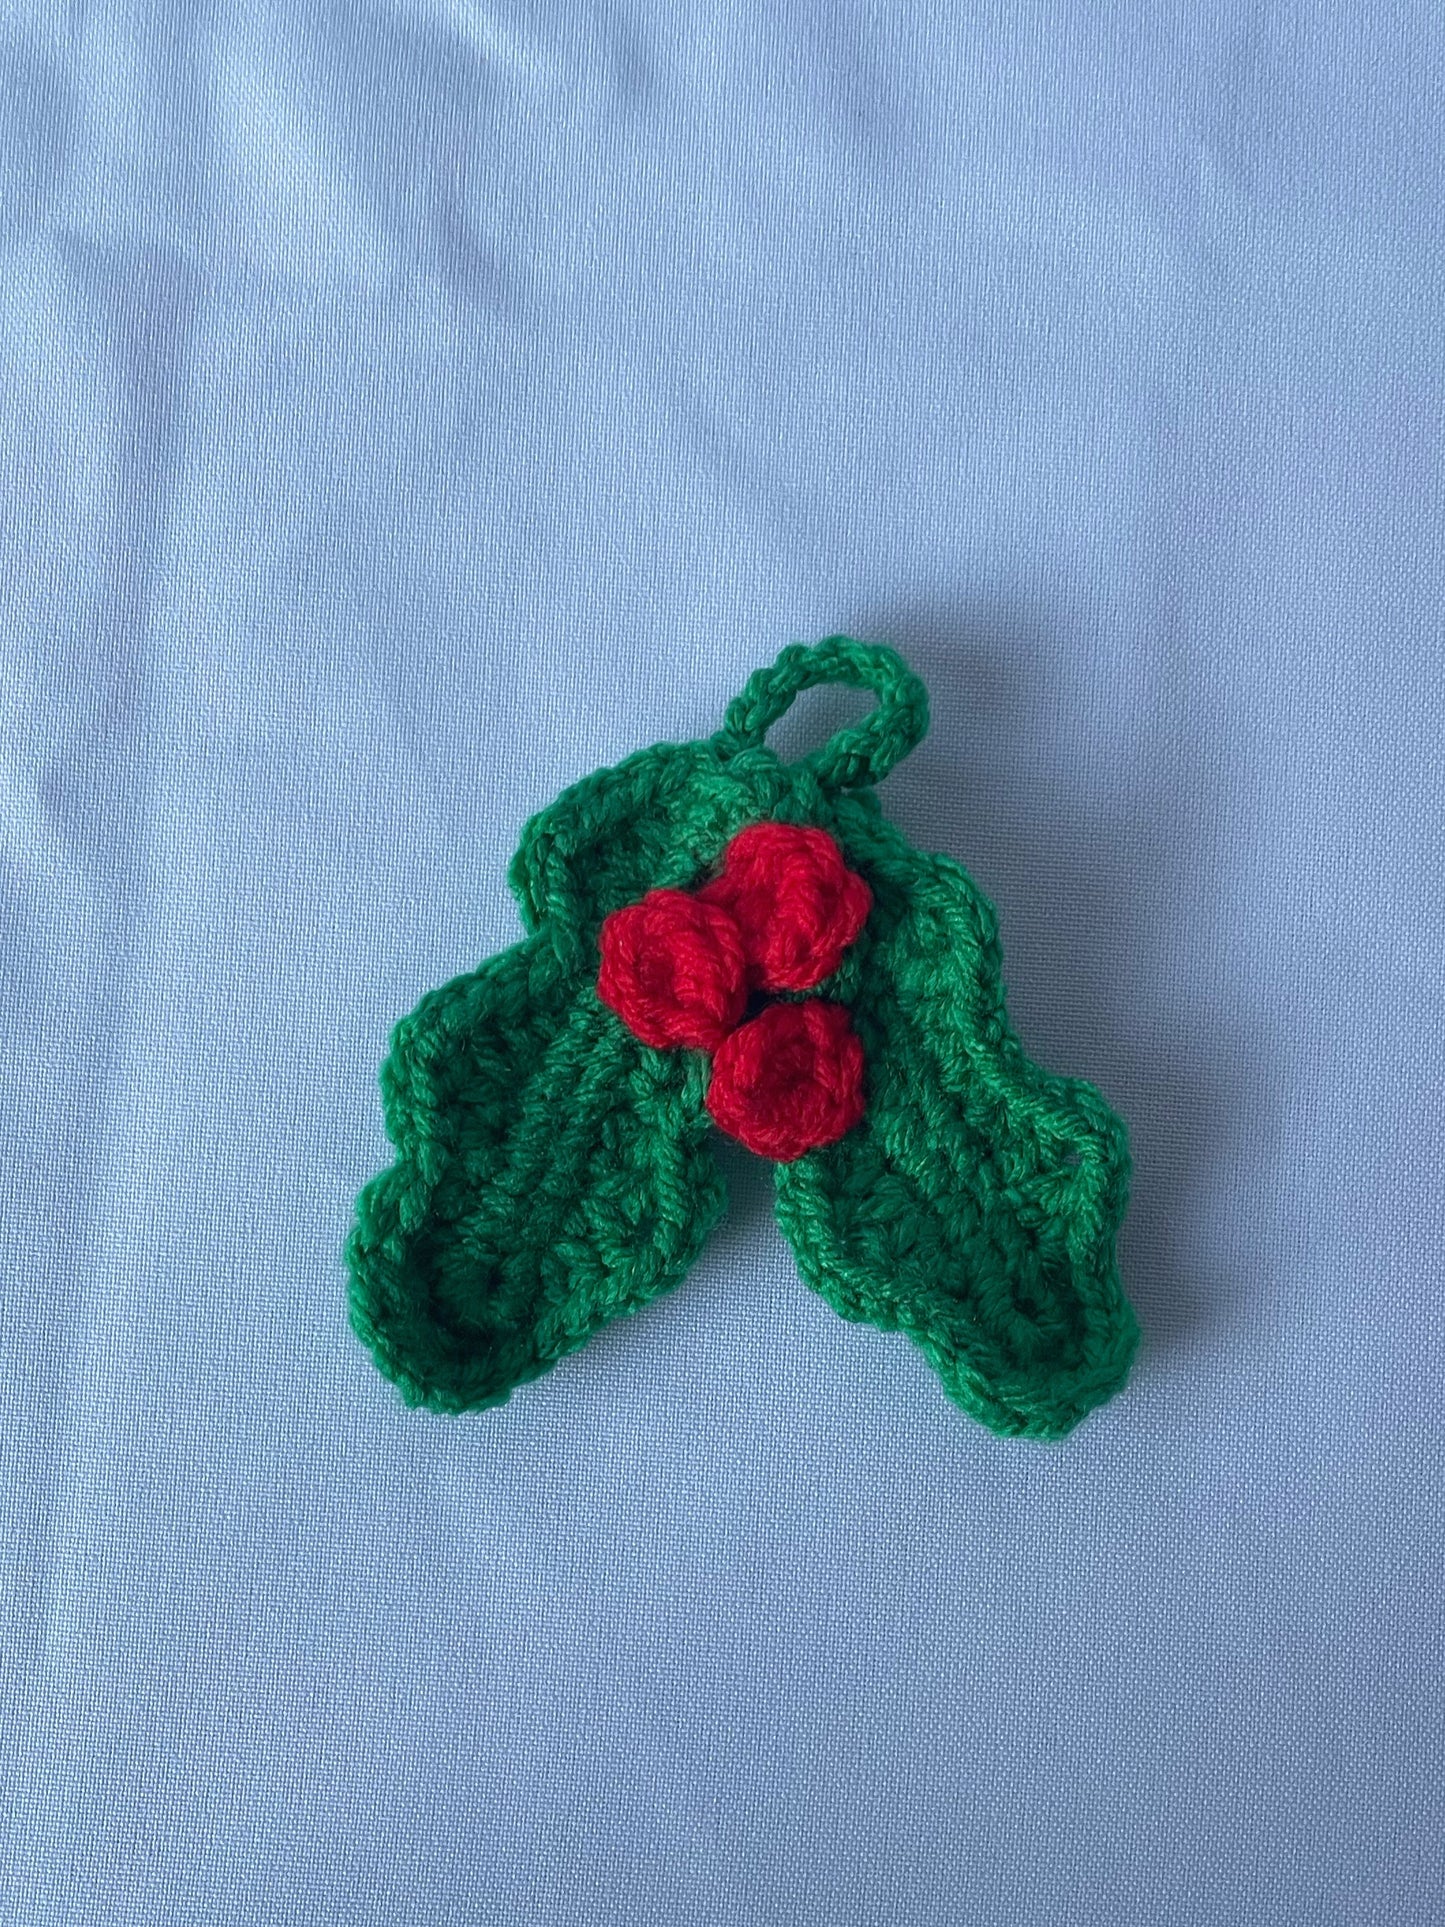 Holly Ornament